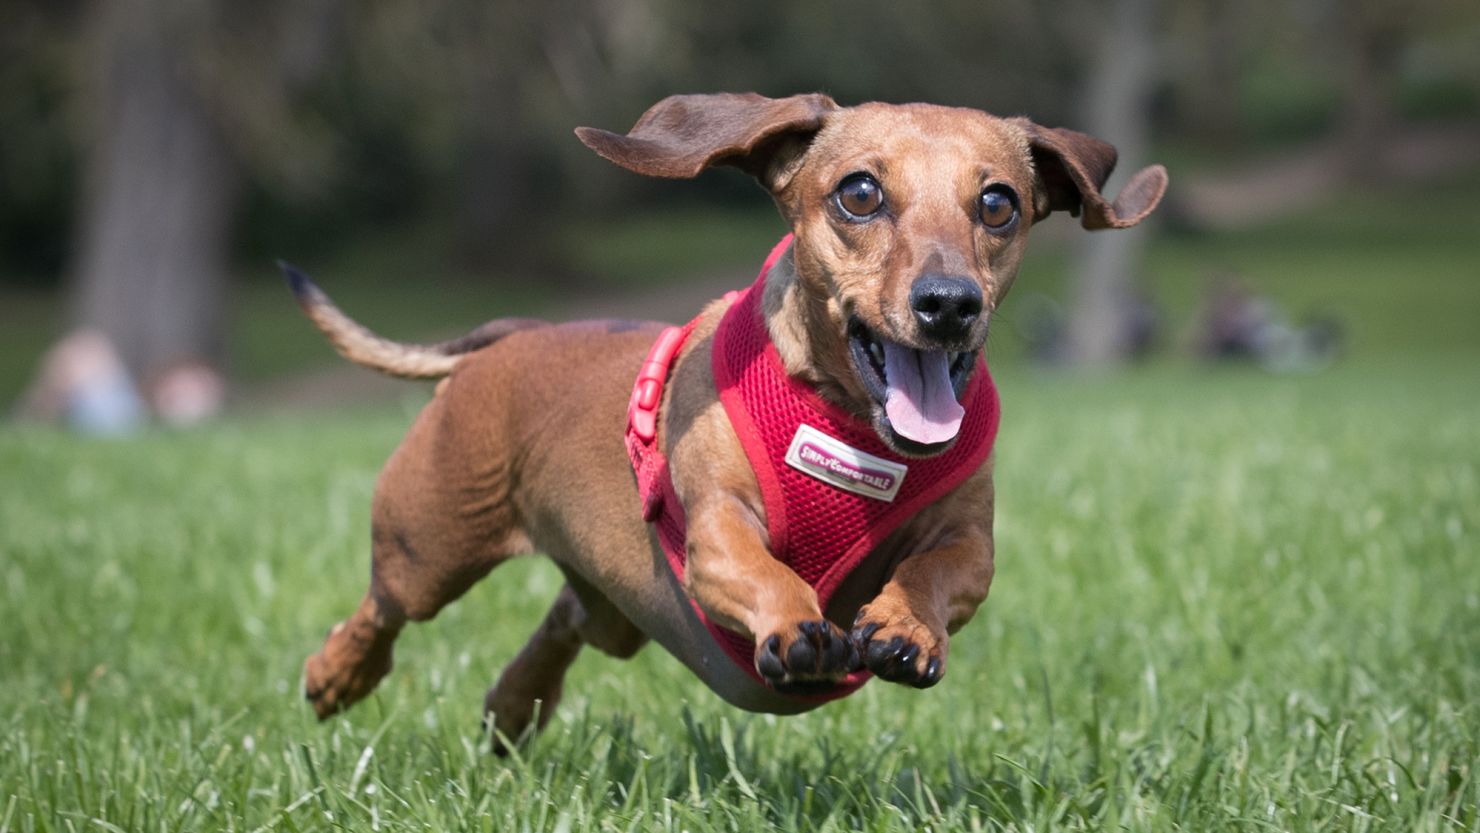 Scampi chases her ball as more than 100 dachshunds and their owners, members of the Sausage Dog Club Bath, gather in front of the historic Royal Crescent in Royal Victoria Park on April 2, 2017, in Bath, England.